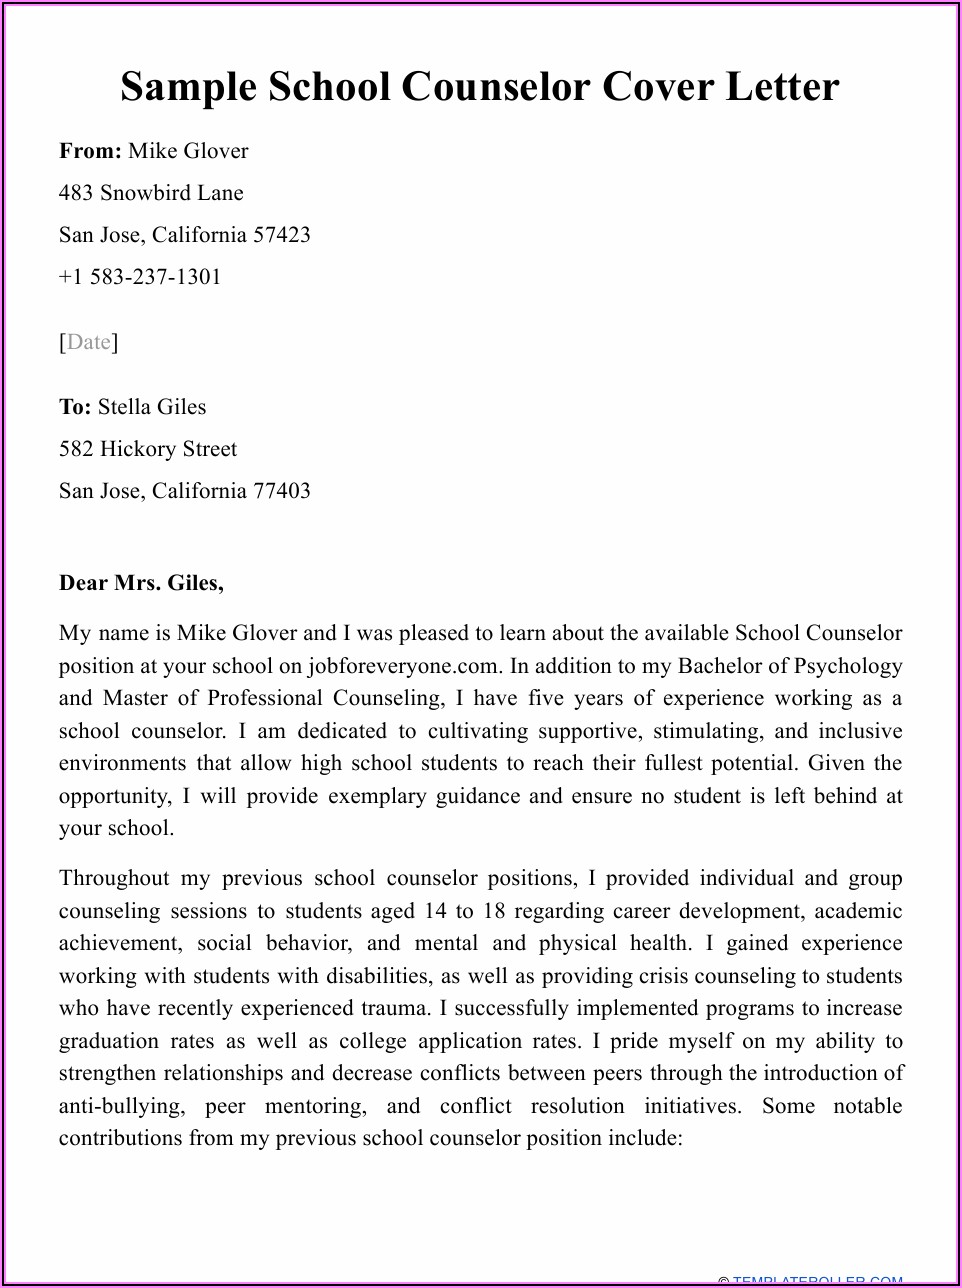 School Counselor Cover Letter Pdf